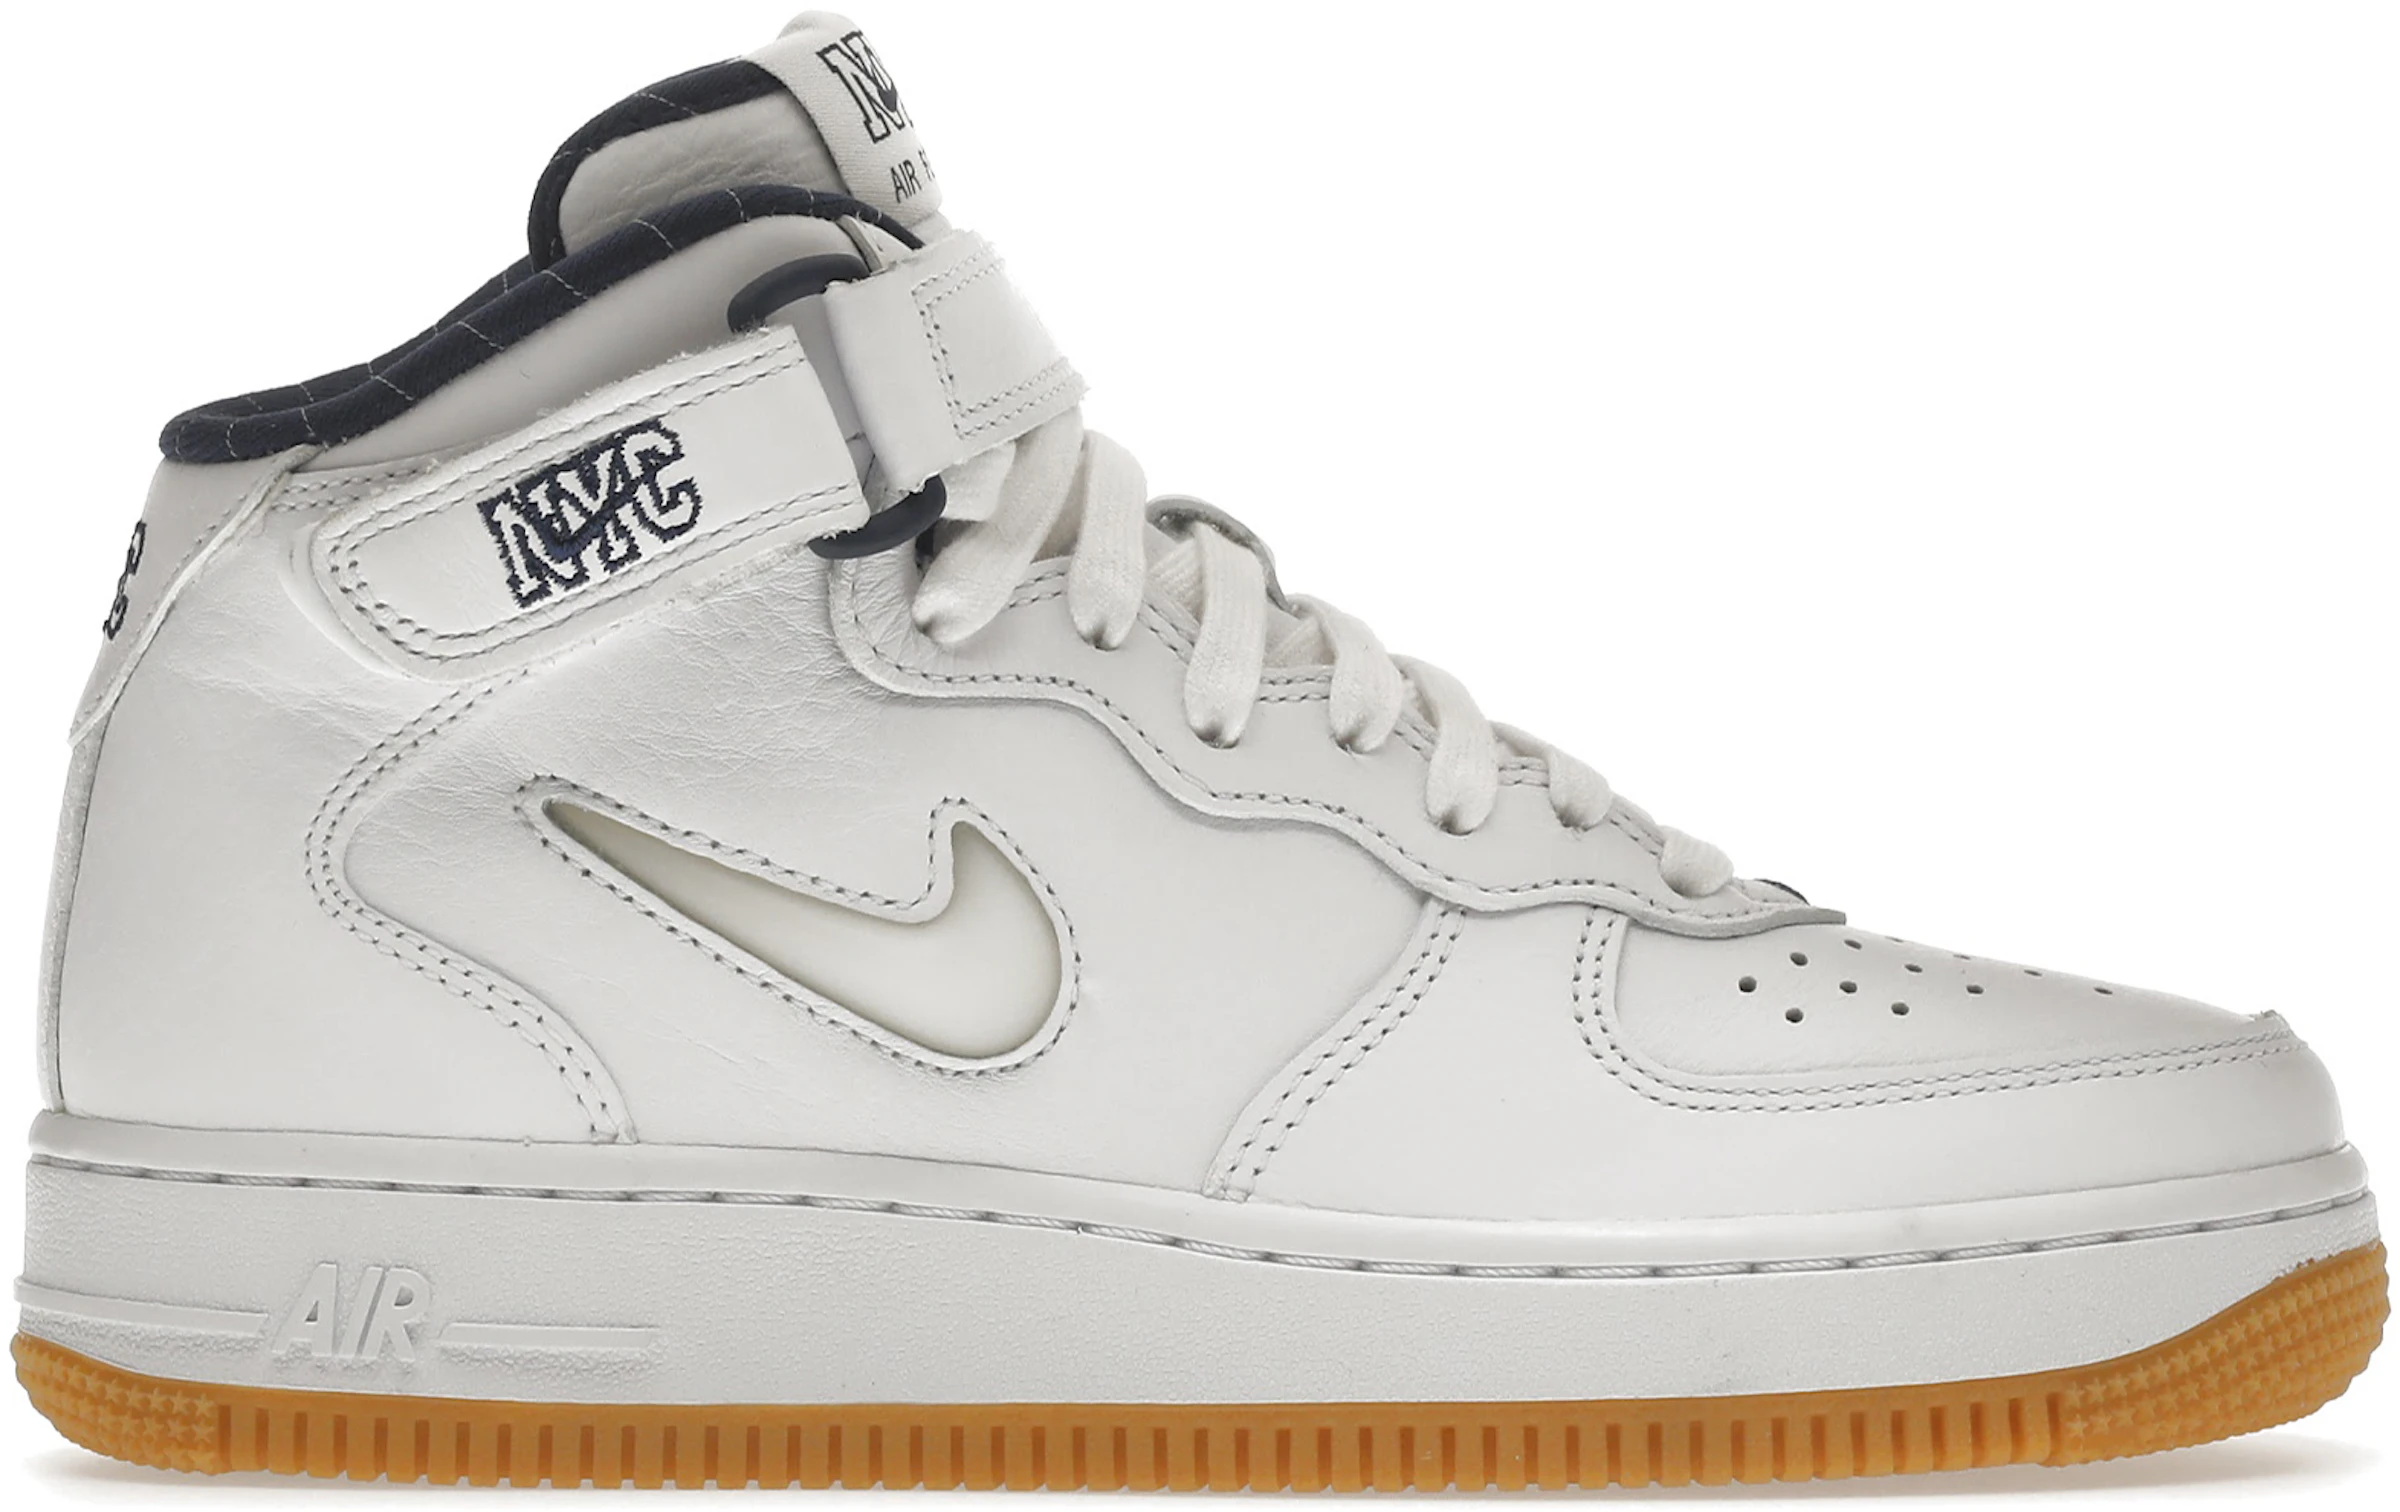 Nike Air Force 1 Mid QS Jewel NYC White Midnight Navy - DH5622-100 -